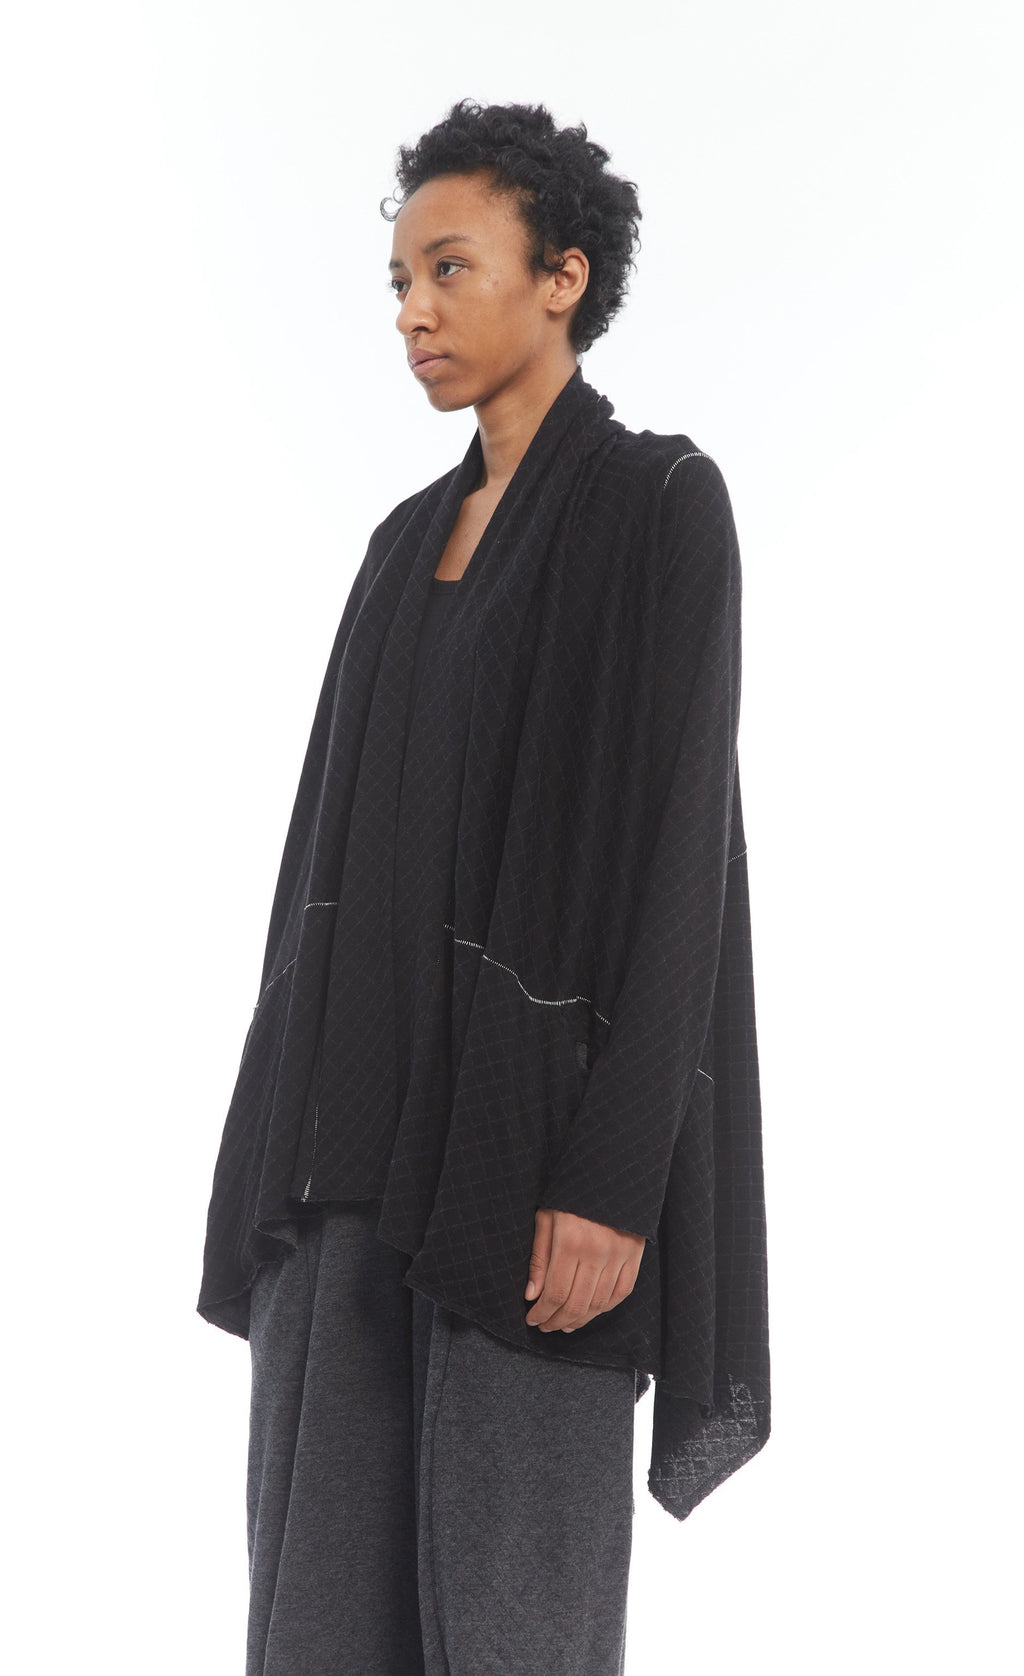 Front top half view of a woman wearing the mxmatthildur beth cardigan. This cardigan has long sleeves and a draped open front. The cardigan is black with ivory stitching.